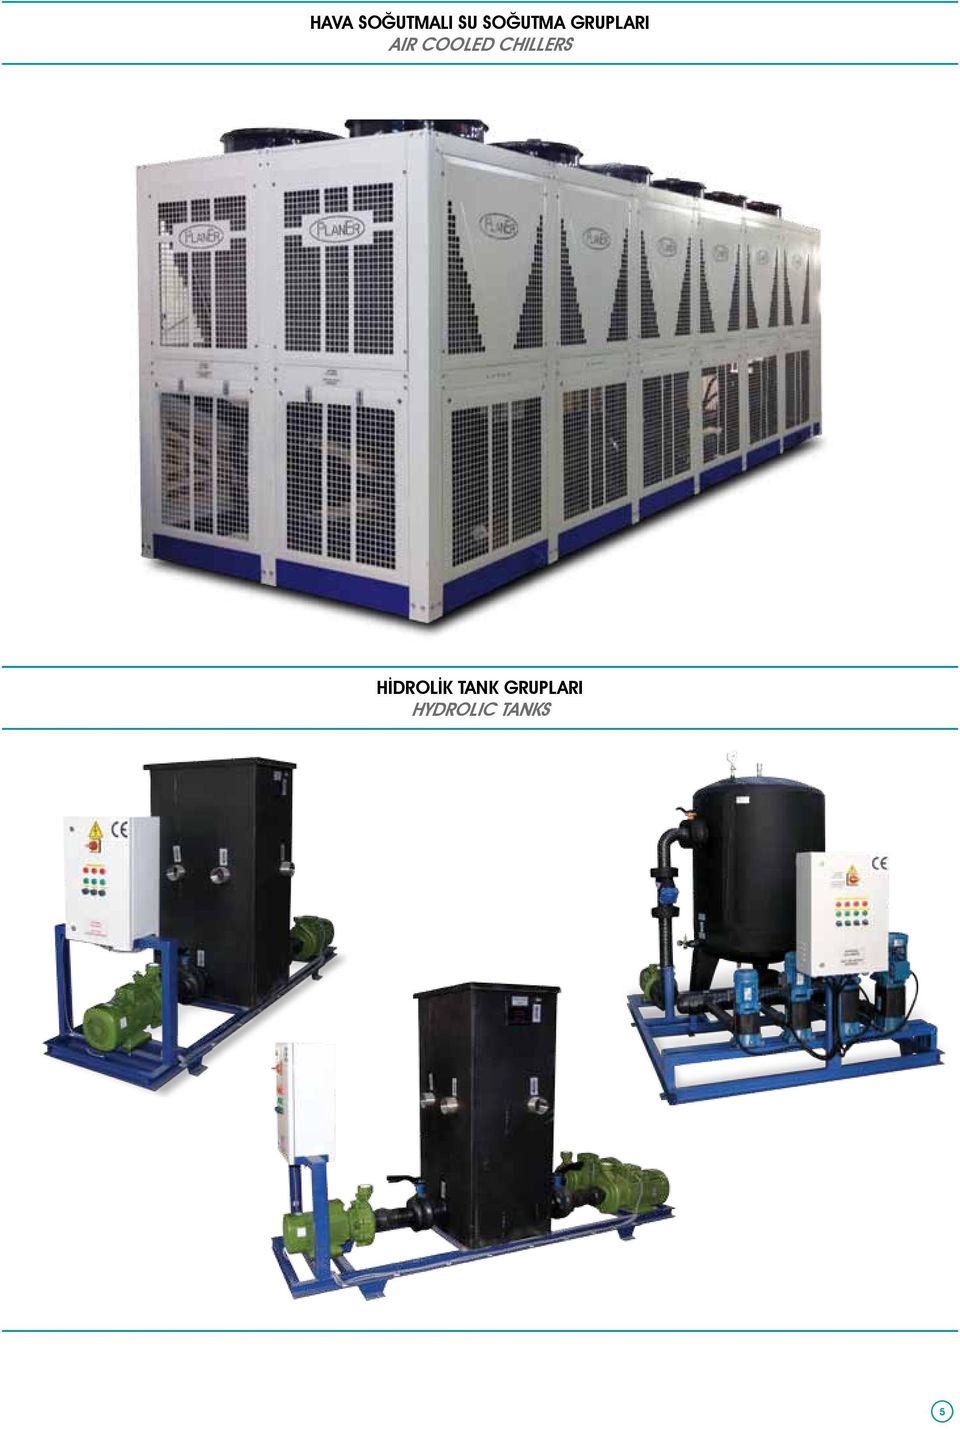 COOLED CHILLERS